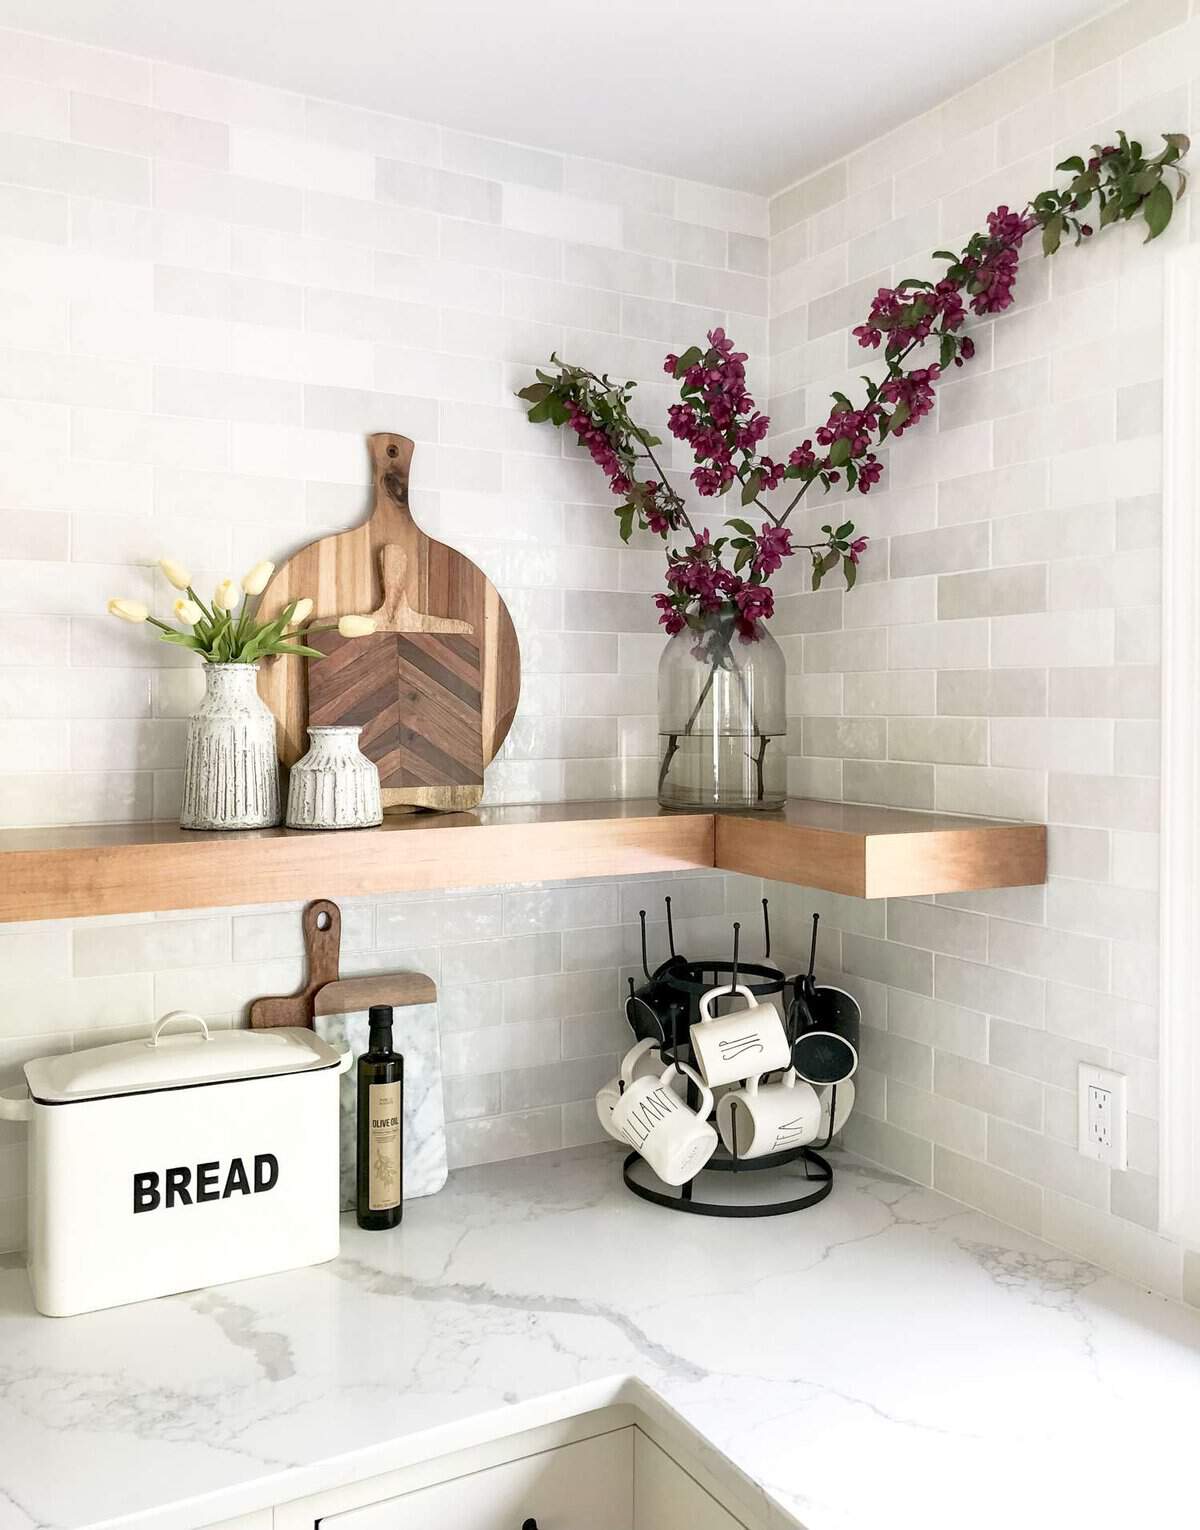 Do you love the look of marble countertops? Consider quartz that looks like marble for a maintenance free and affordable marble alternative. #fromhousetohaven #quartzcountertops #kitchenremodel #marblequartz